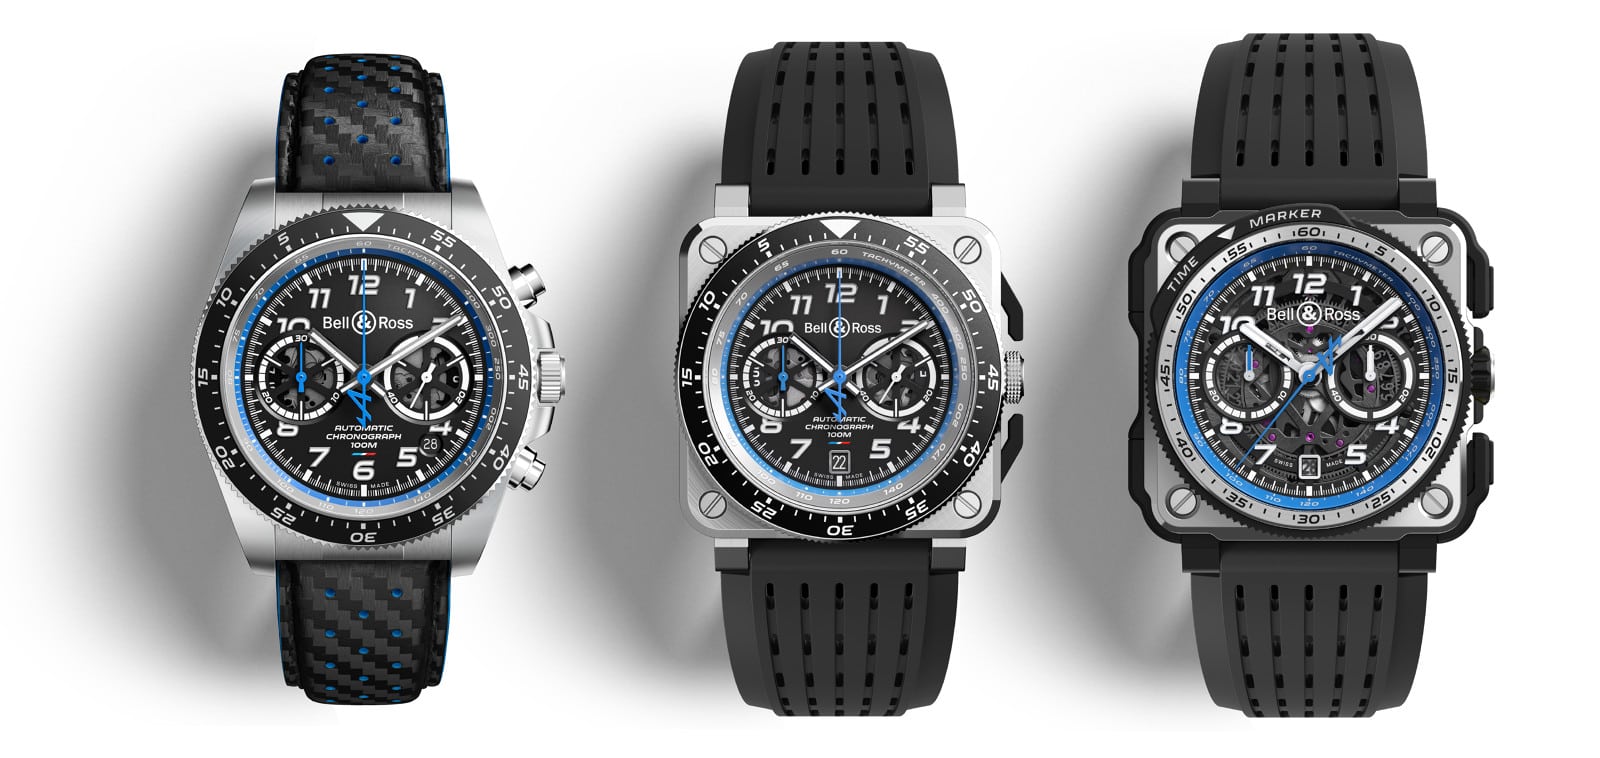 Introducing The Bell & Ross X Alpine F1 A521 Collection